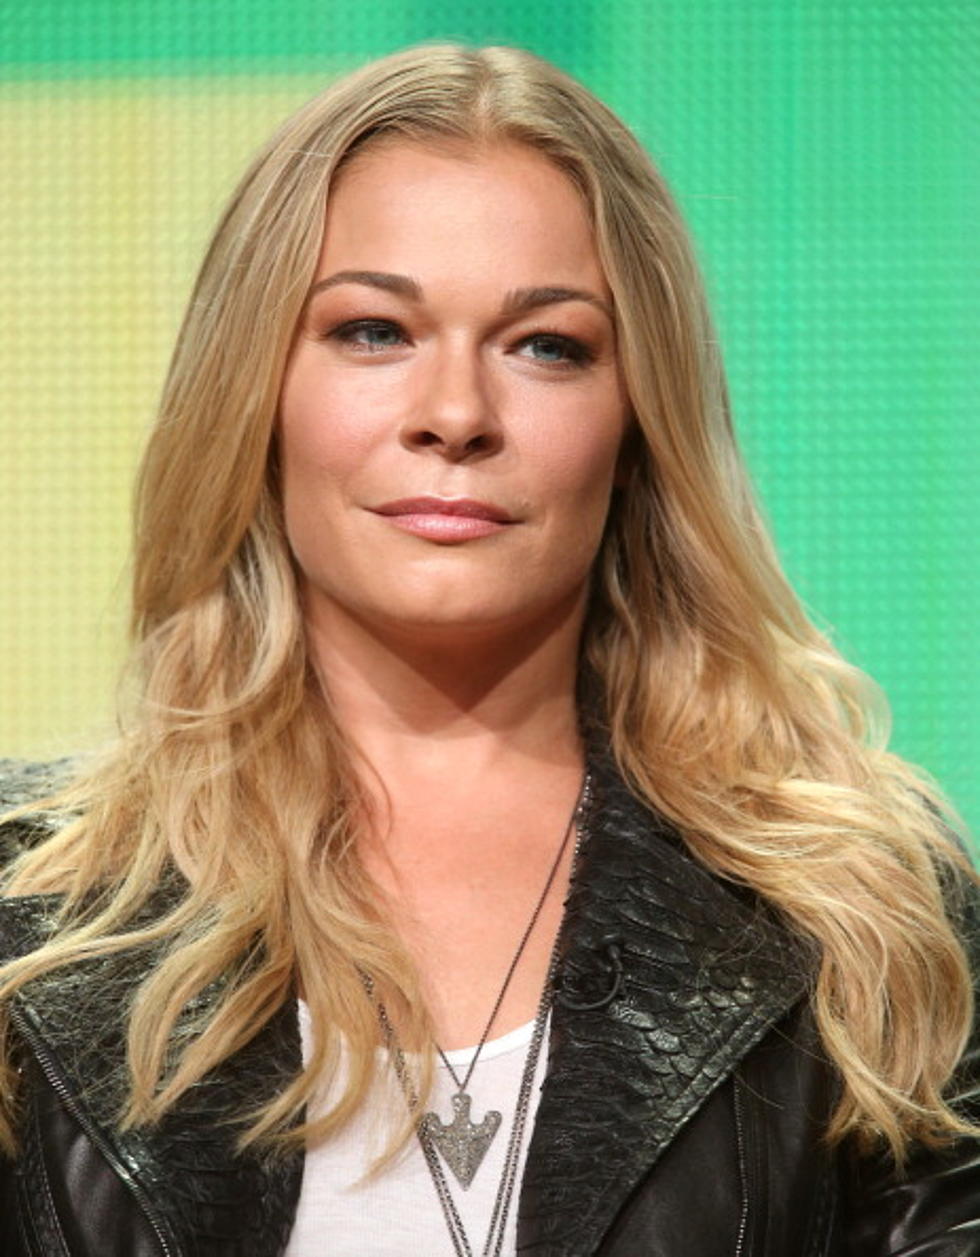 LeAnn Rimes Reveals Christmas Tour in Sexy Video [Watch]